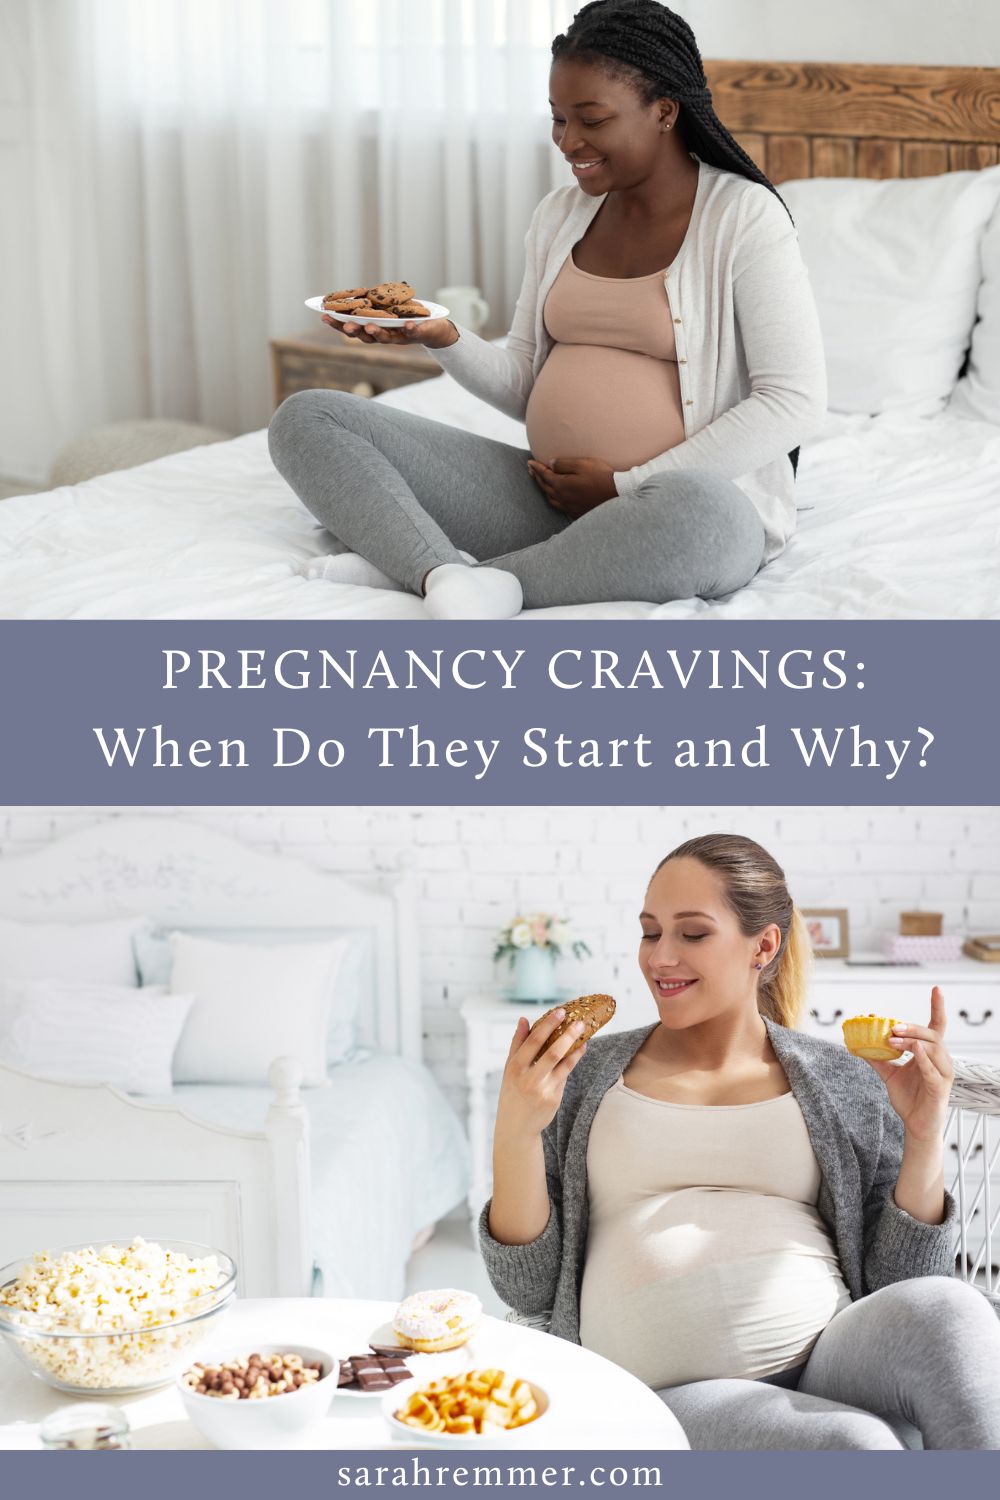 If you’re pregnant or planning to become pregnant you may have questions about food cravings: when do pregnancy cravings start any why? You'll learn all about pregnancy cravings in this post.